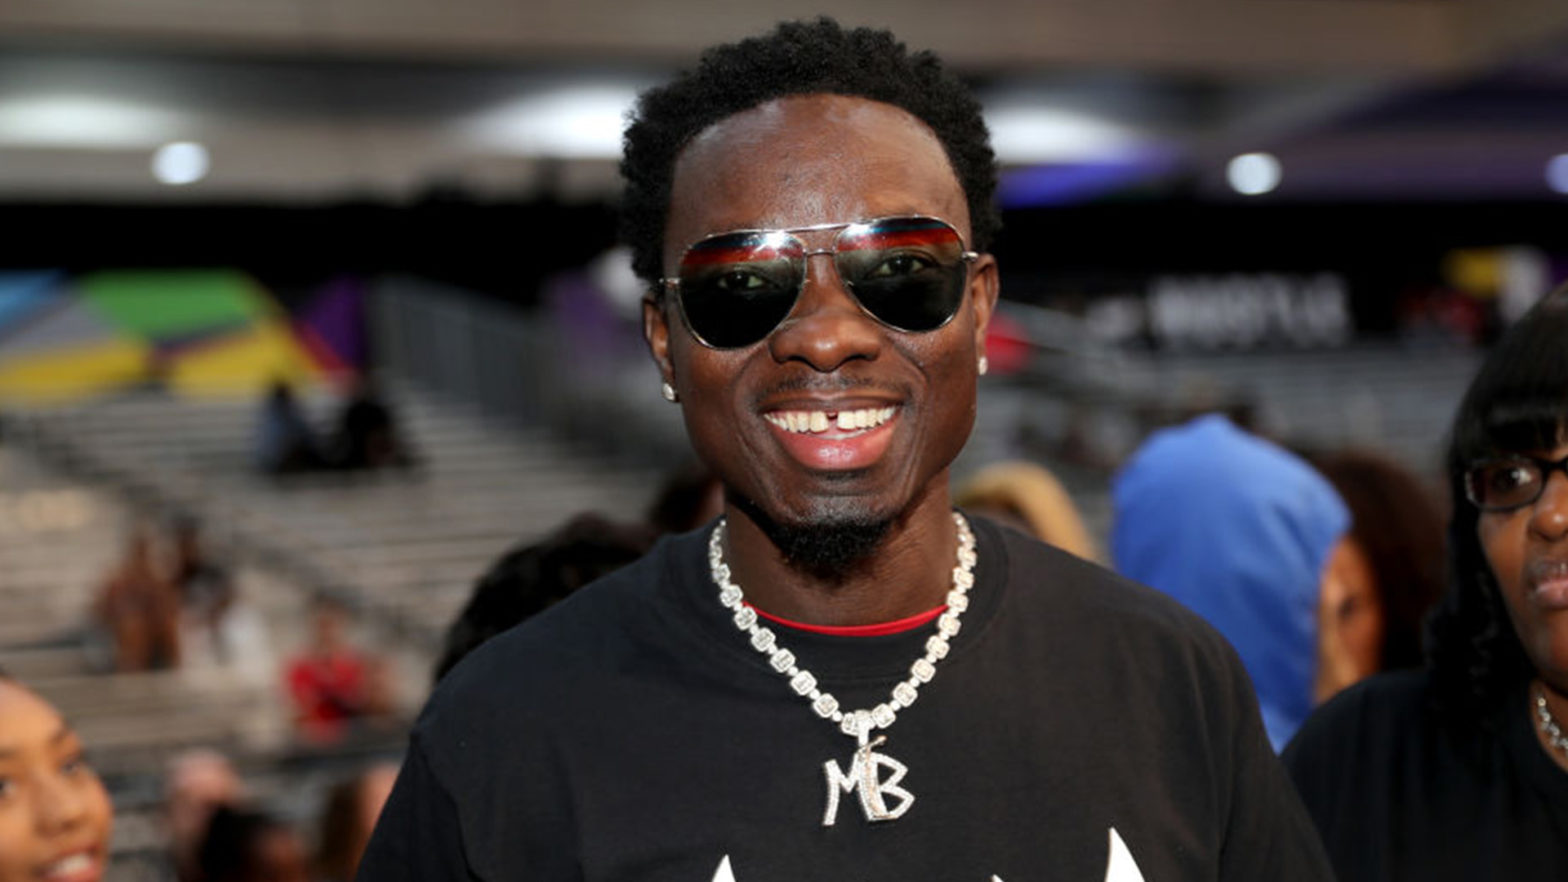 Michael Blackson Opens Free School In His Village In Ghana — 'Today Is The Greatest Day Of My Life'